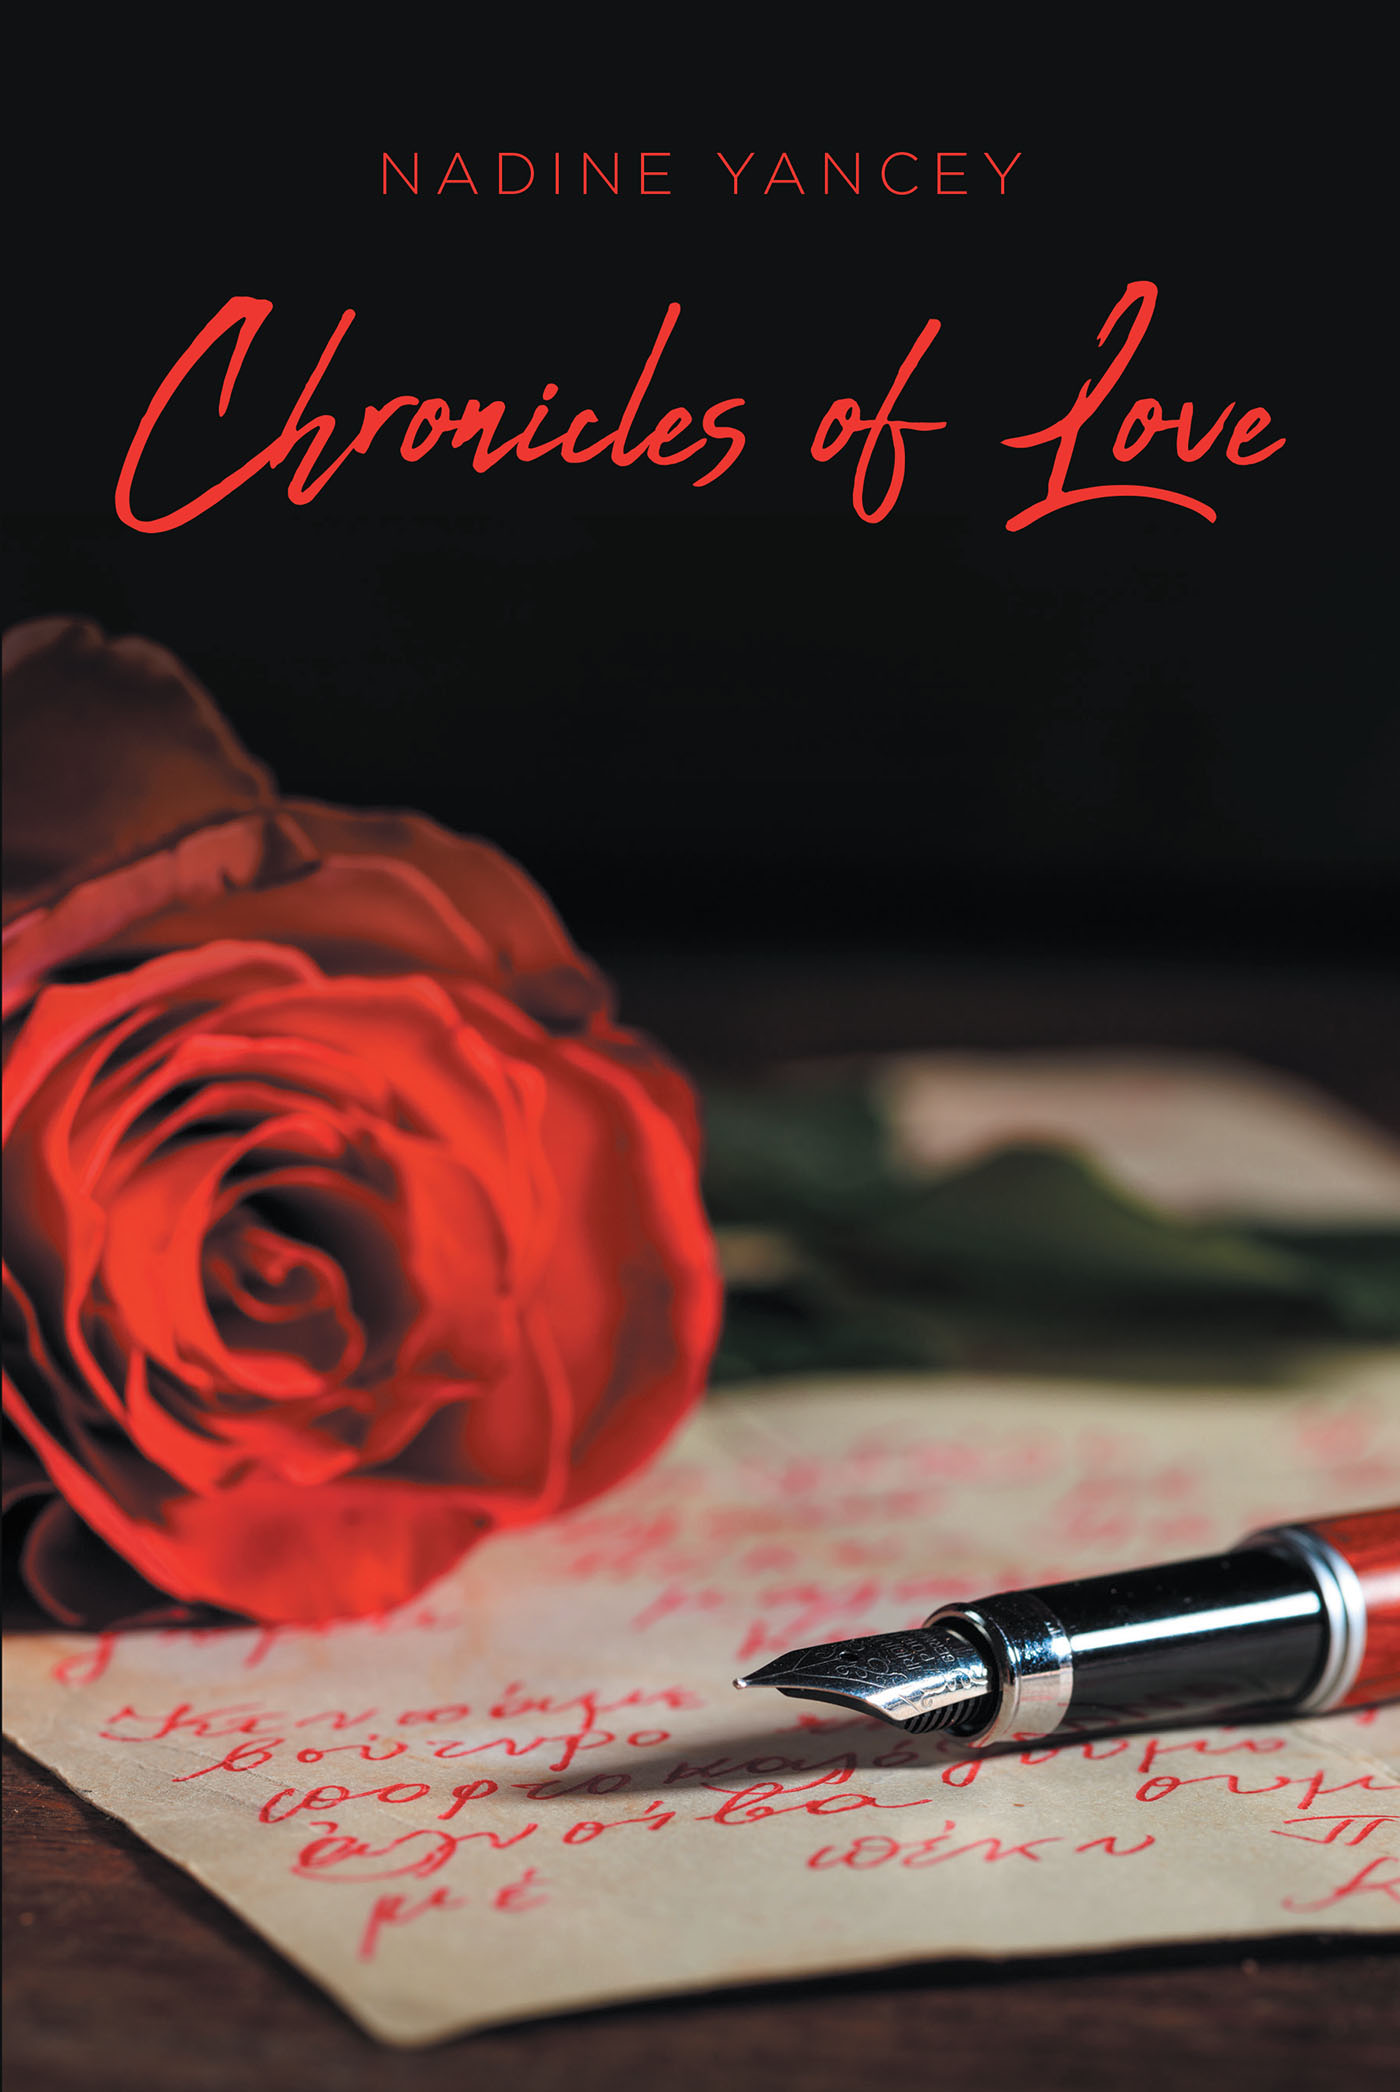 Nadine Yancey’s New Book, "Chronicles of Love," is a Captivating Account That Documents the Author's Life and All That Her Past Struggles Have Taught Her Moving Forward